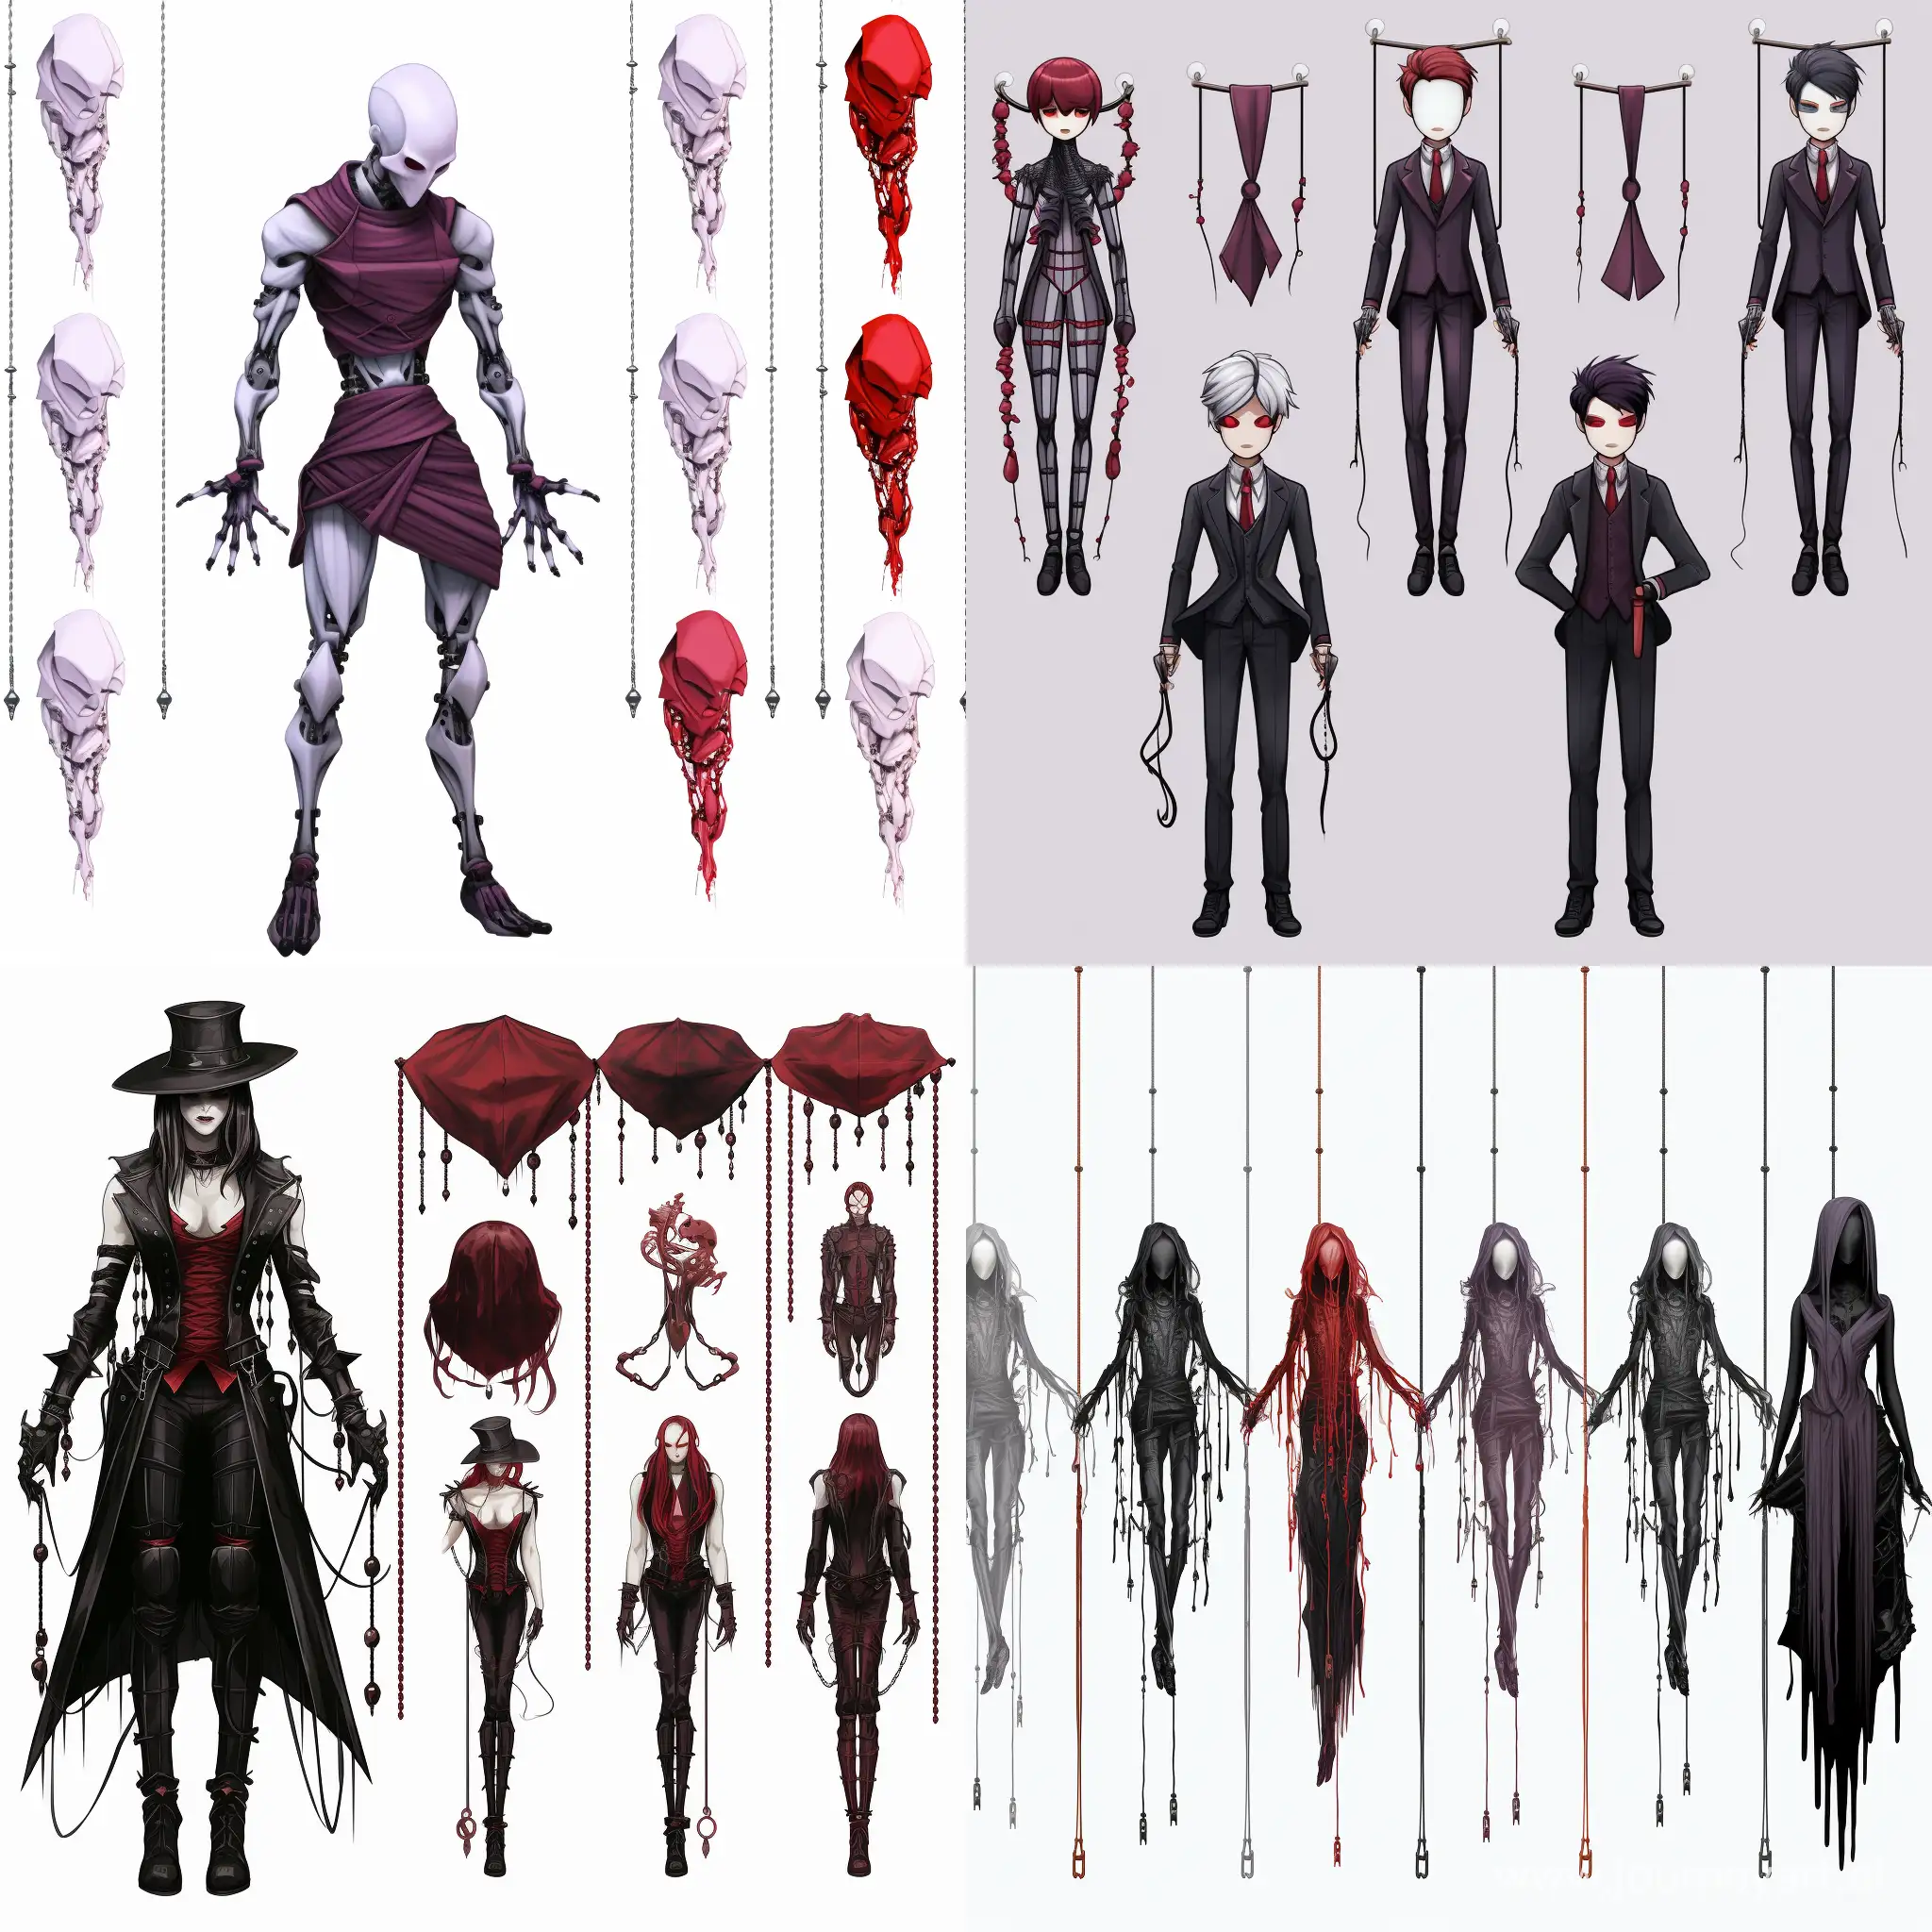 Fantasy-Marionette-Spritesheet-in-Black-Red-White-and-Purple-Colors